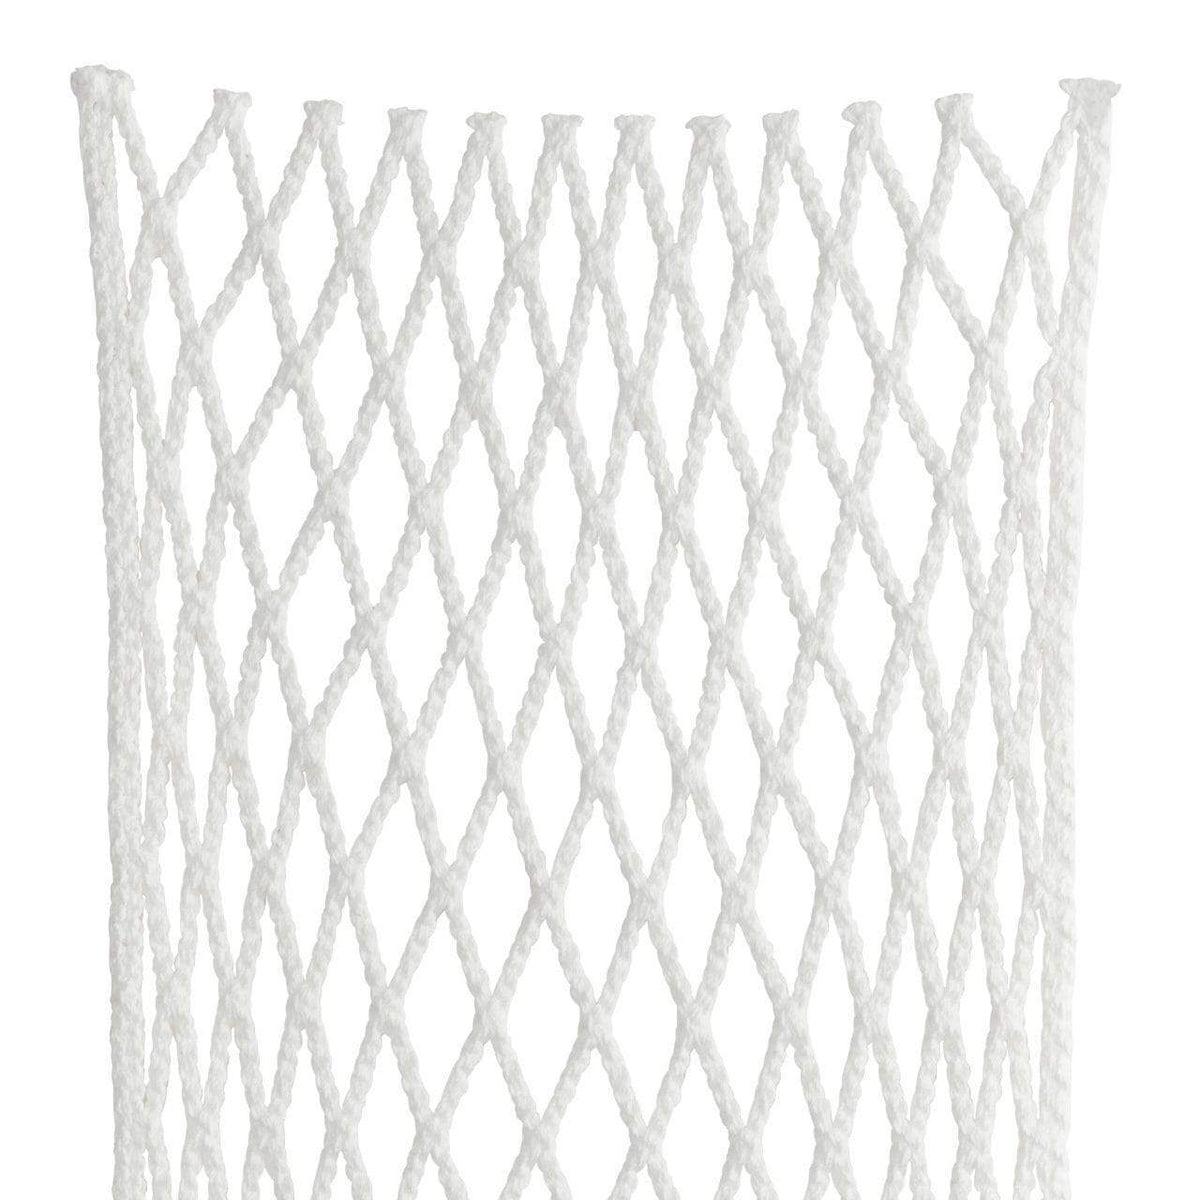 StringKing Stringing Supplies White / 12D / Semi-Hard StringKing Grizzly 2x Goalie Lacrosse Mesh from Lacrosse Fanatic